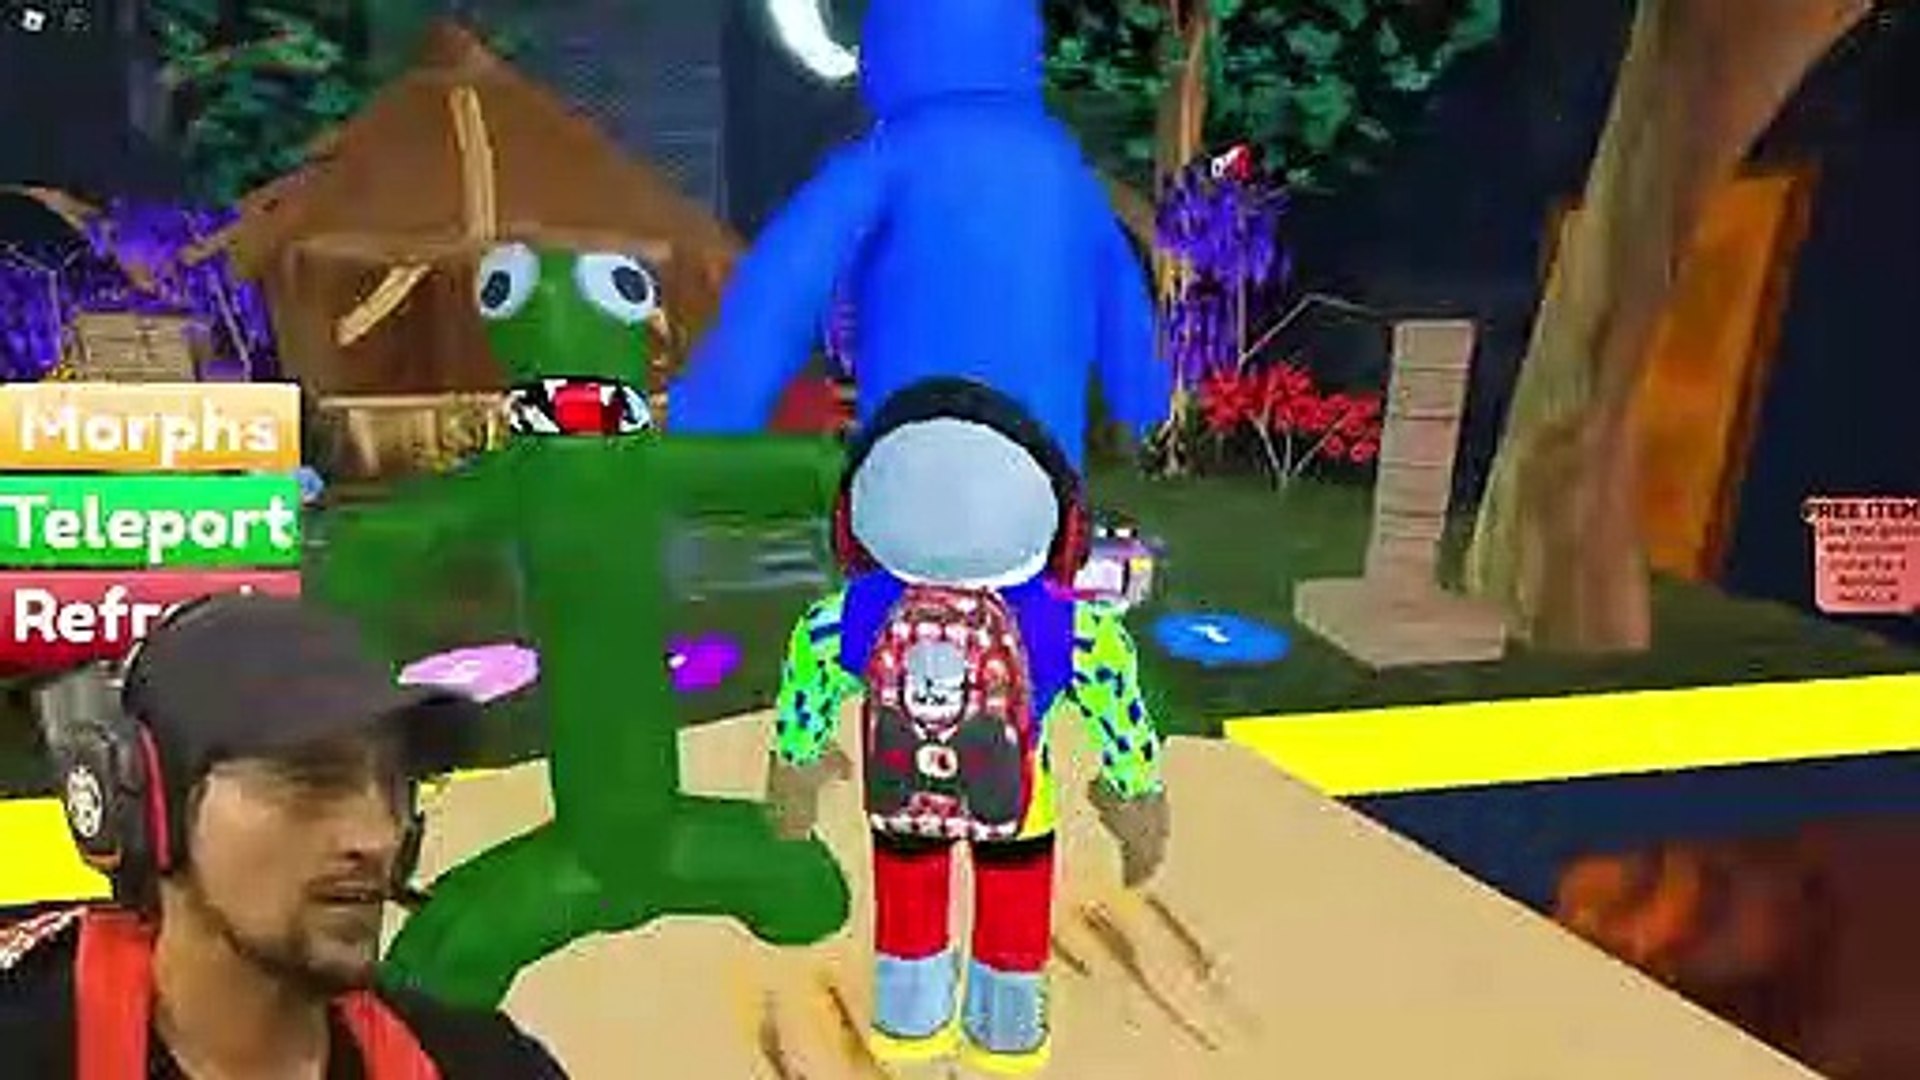 Getting OOFD by PURPLE in CHAPTER 2 of RAINBOW FRIENDS on ROBLOX